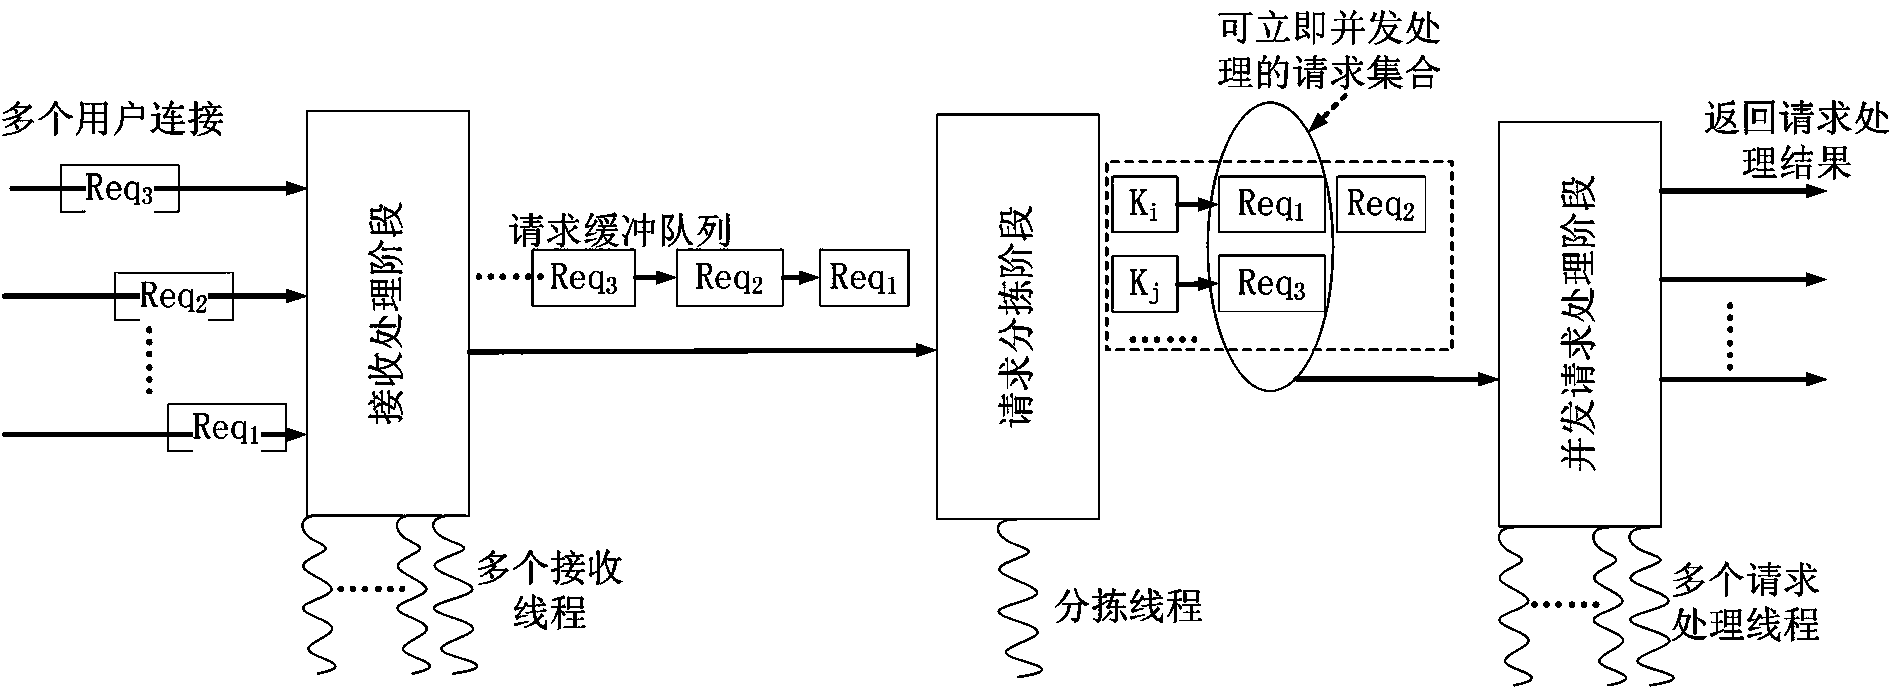 Method of high-speed concurrent processing of user requests of Key-Value database